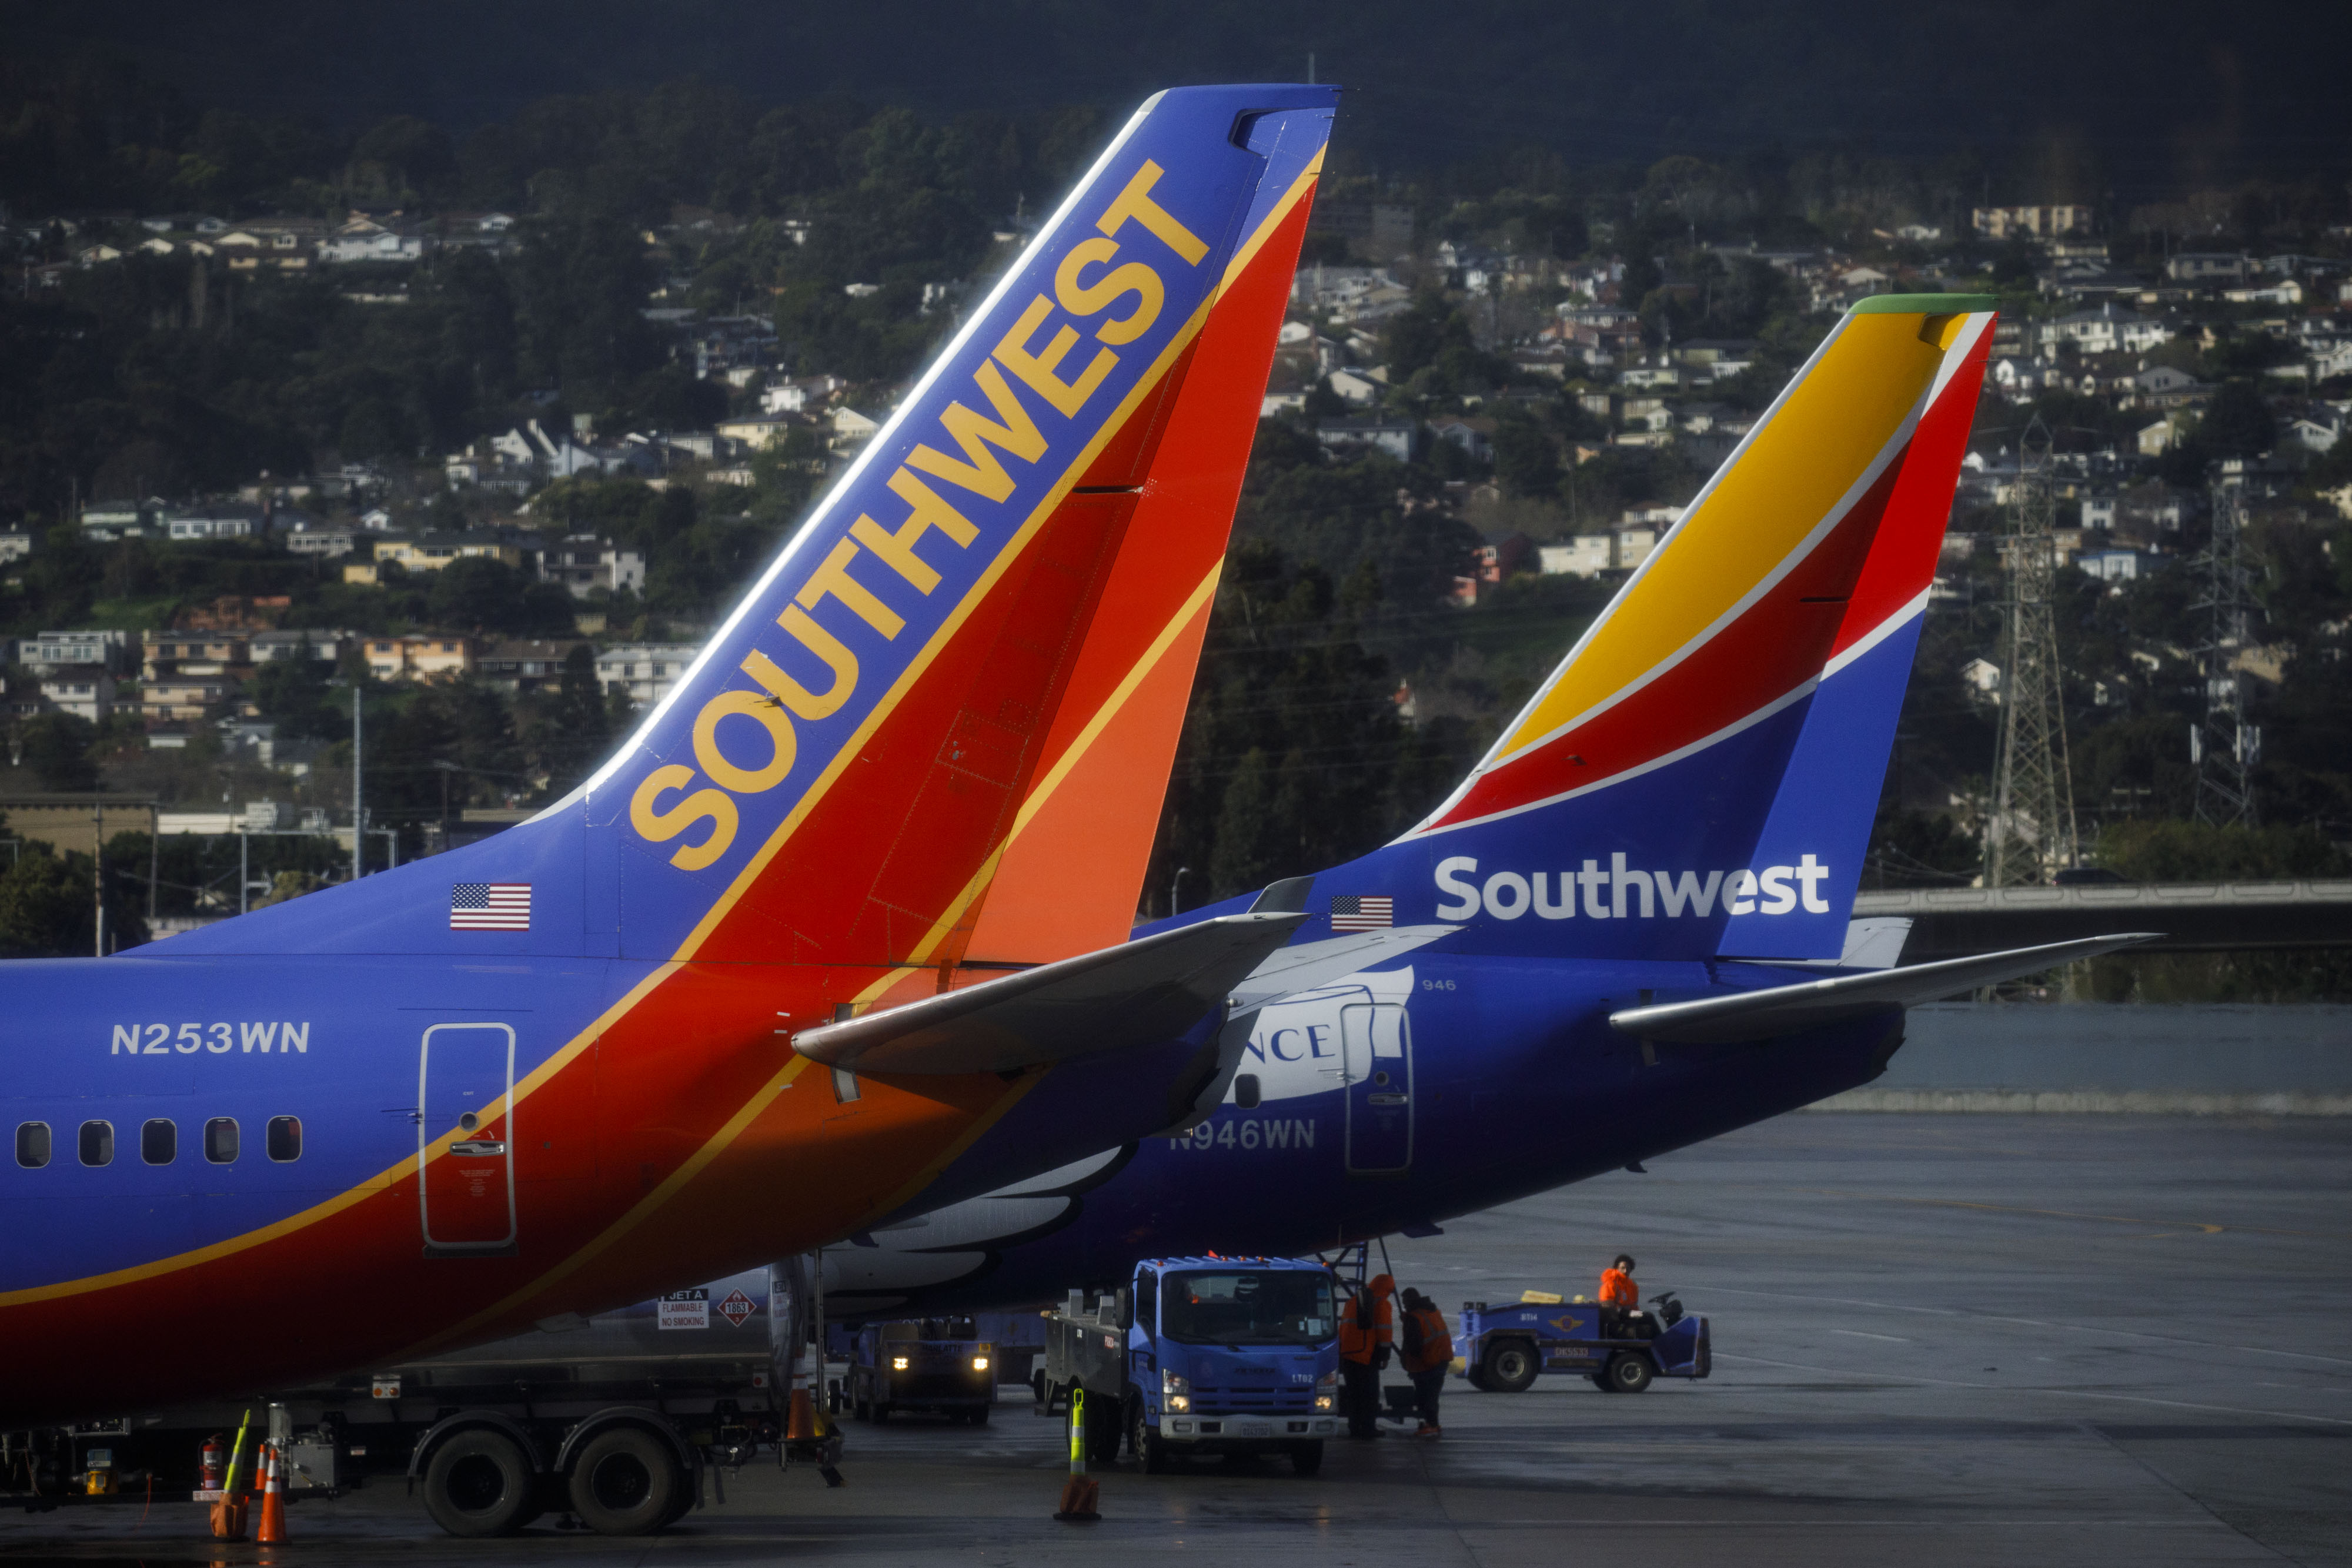 Southwest Air (LUV) Earnings Airline Sees Profit This Quarter